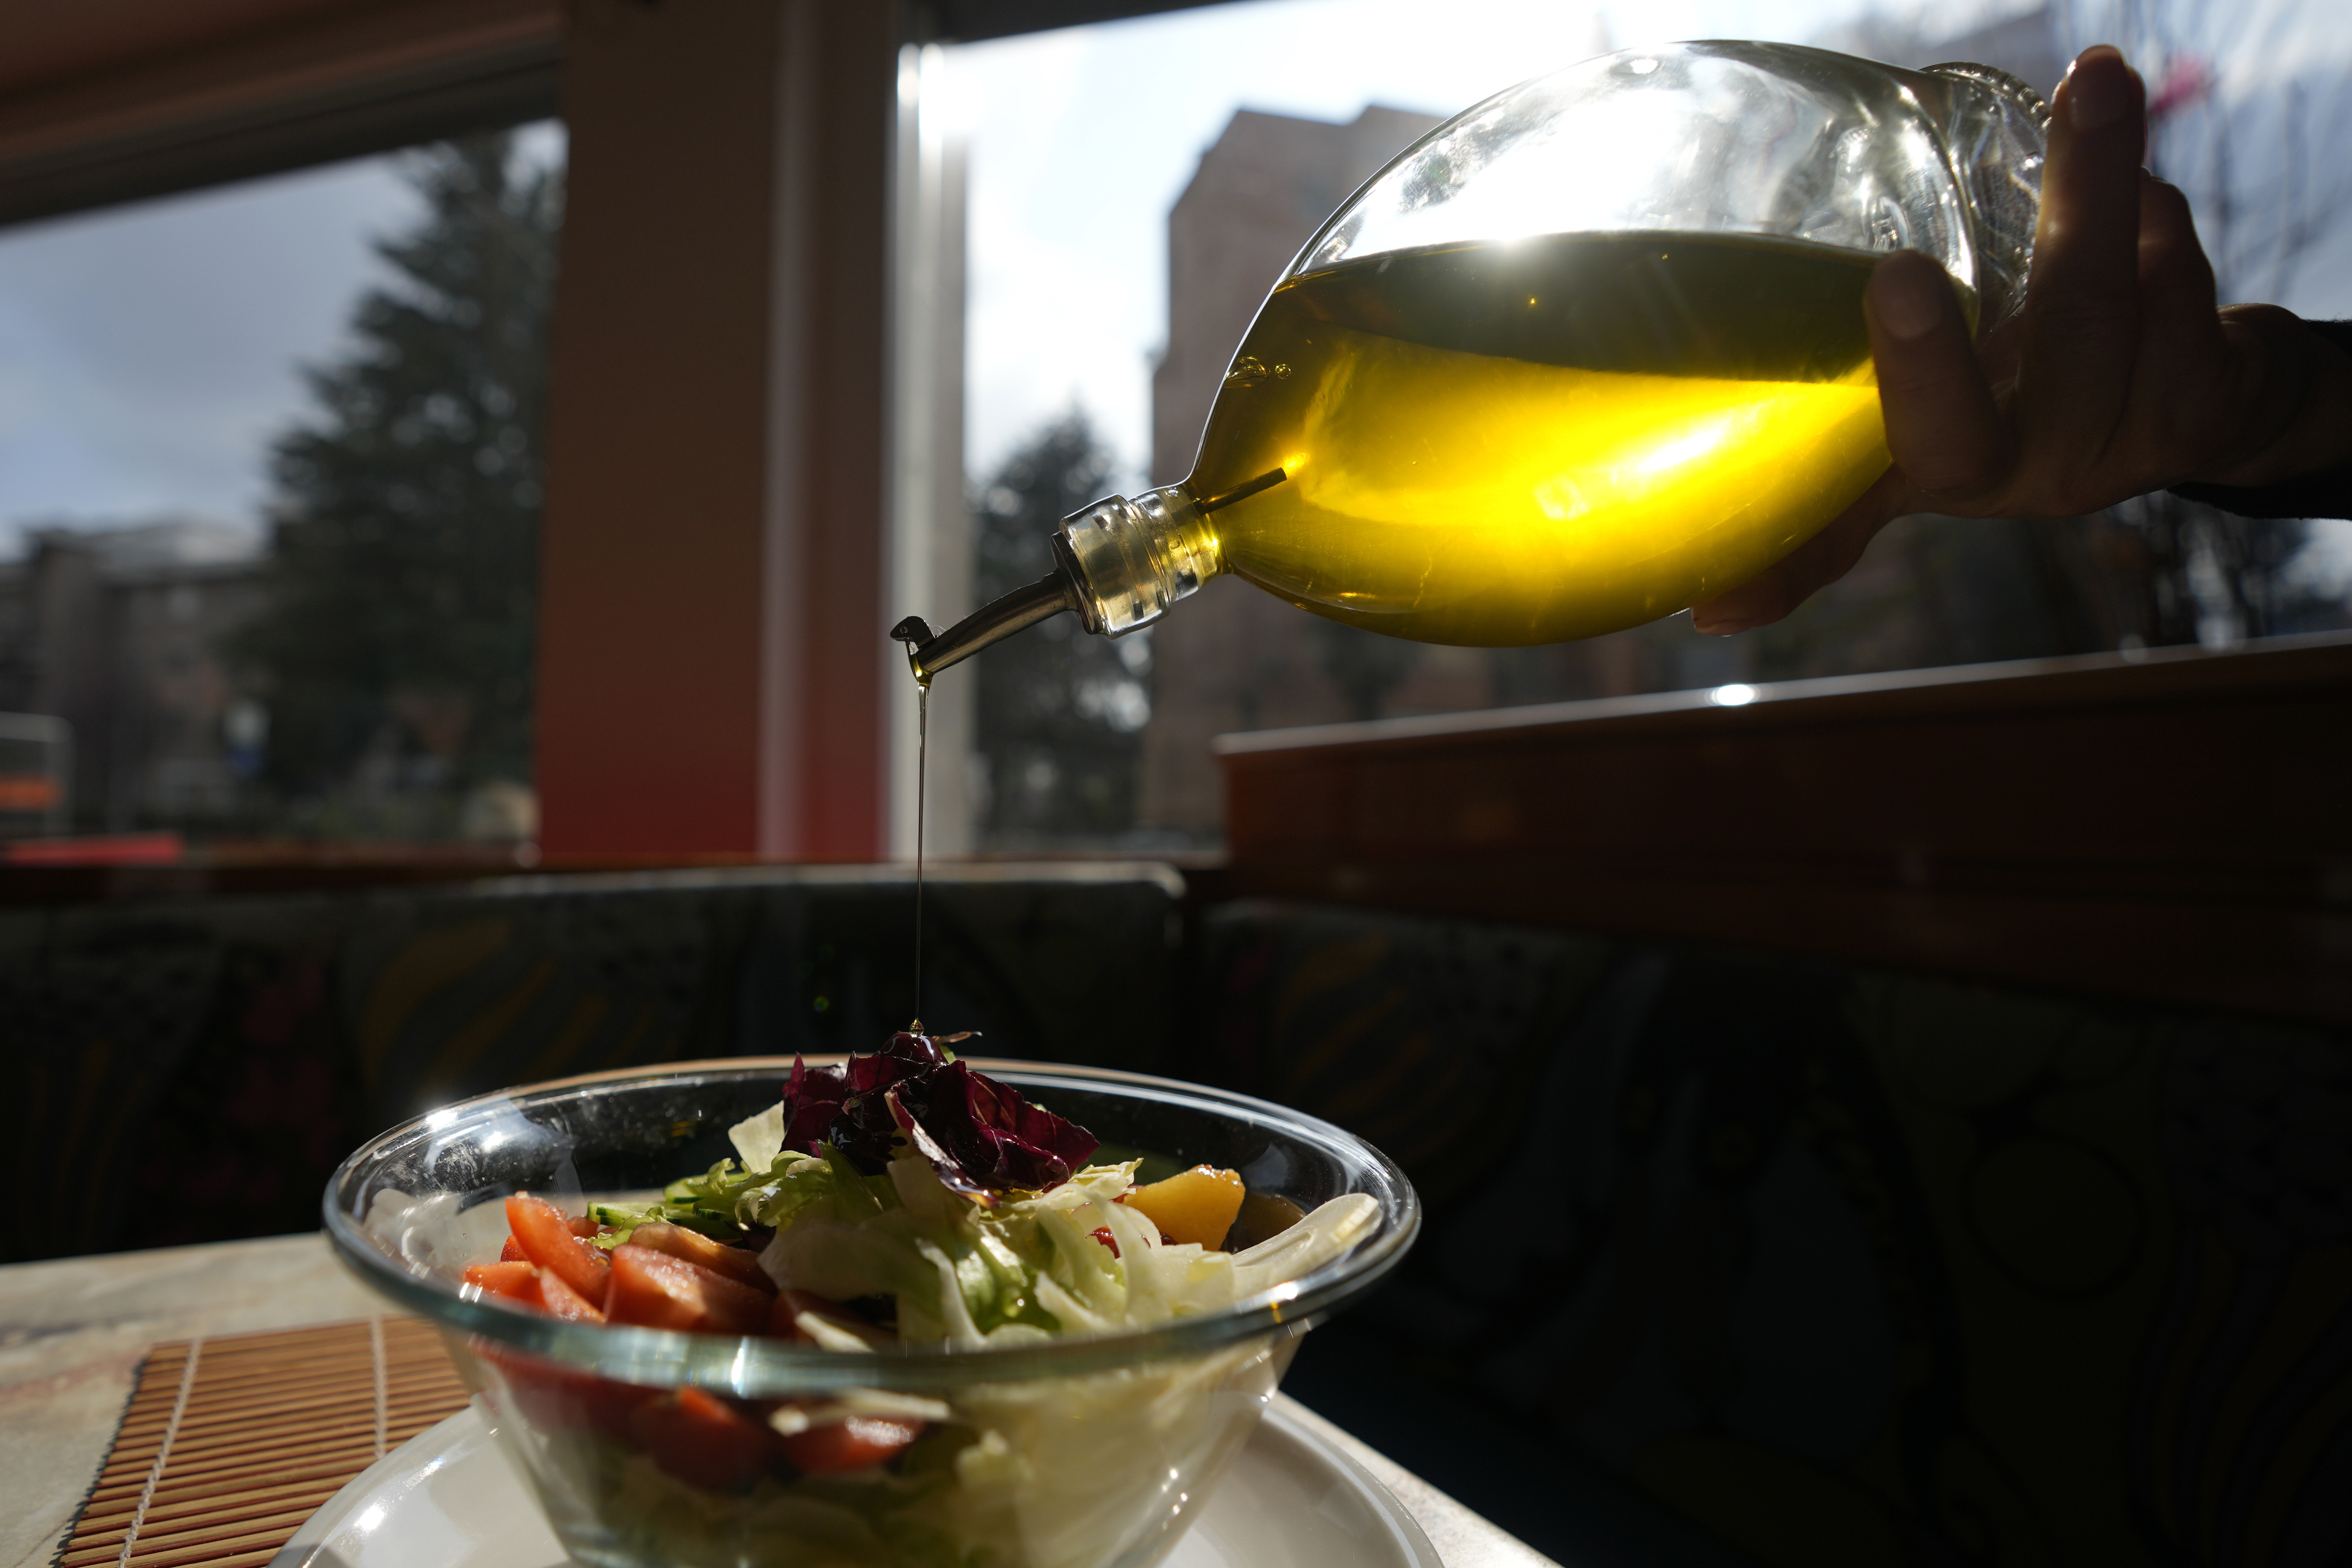 Does an olive oil shortage reflect bigger risks to Canada’s food supply chain?